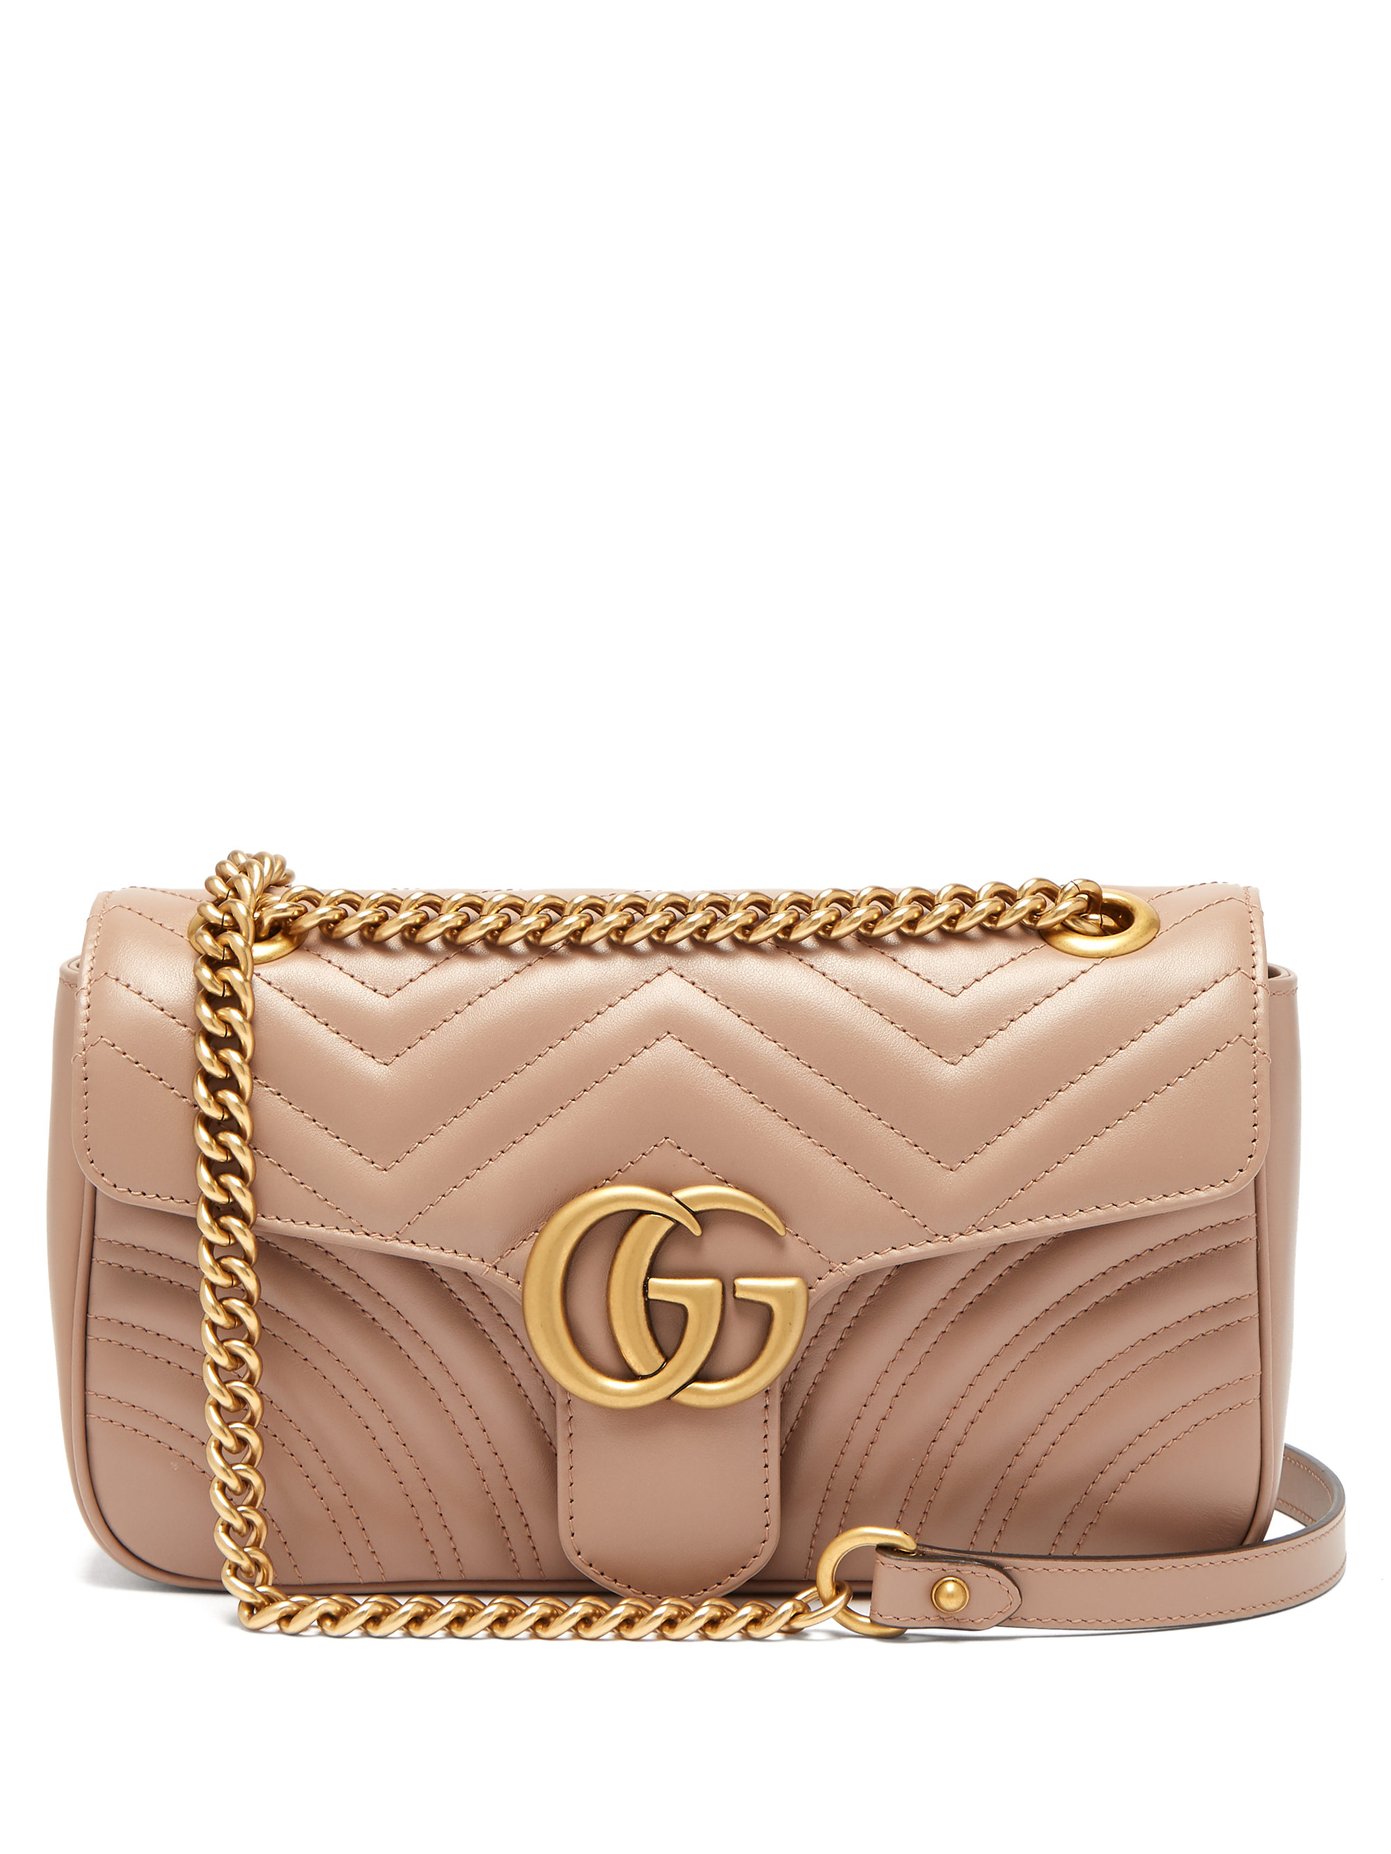 gucci gg marmont quilted leather shoulder bag